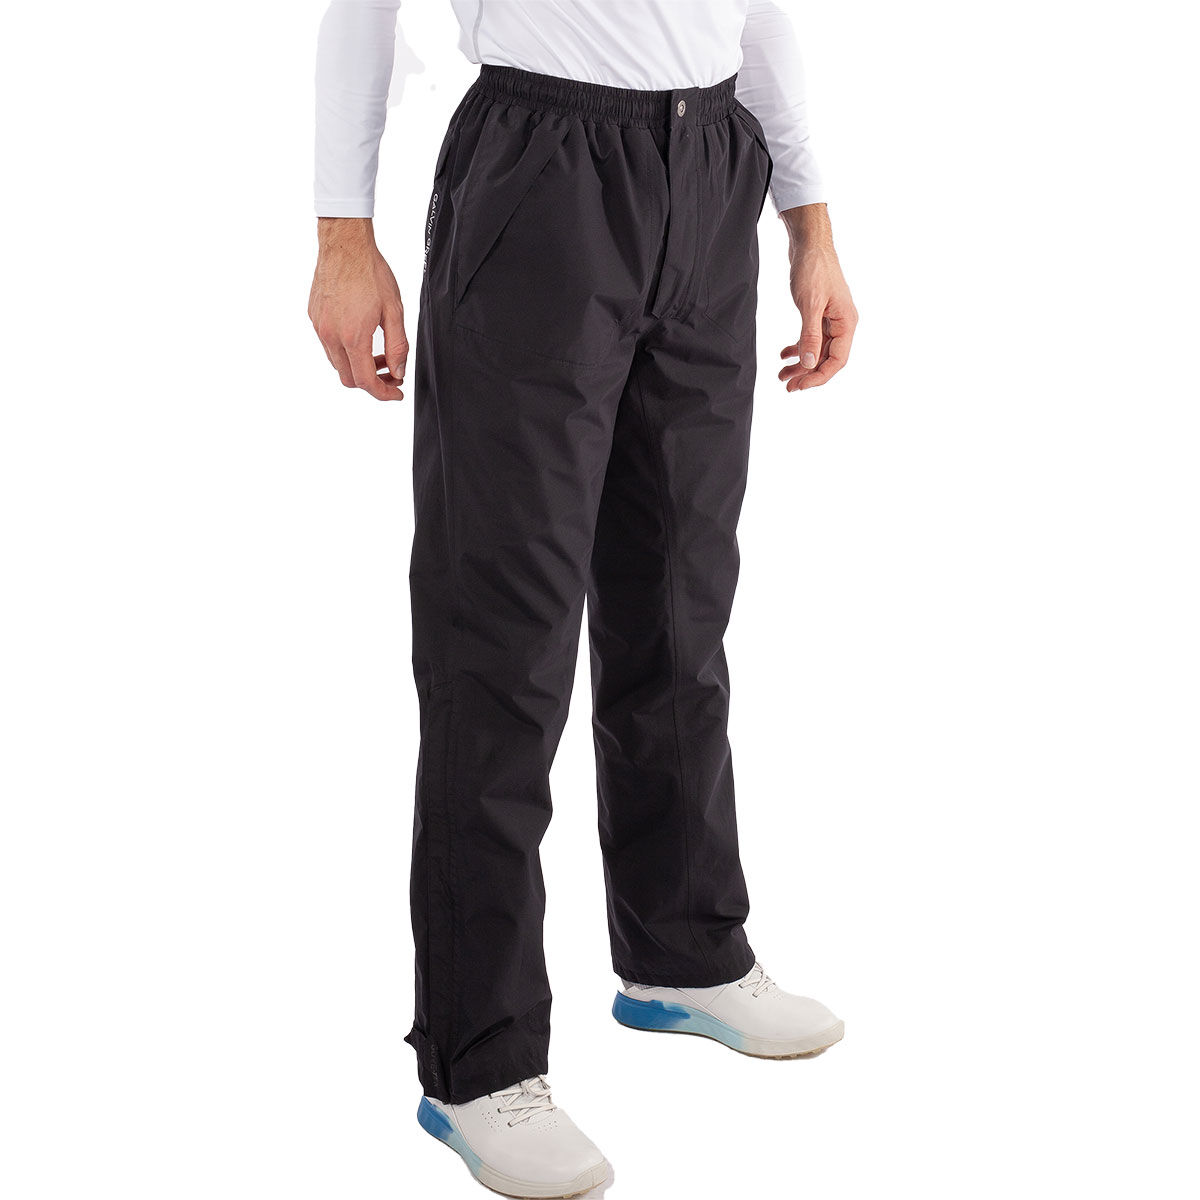 Galvin Green Mens Black Lightweight Andy GORE-TEX Waterproof Long Fit Golf Trousers, Size: L | American Golf